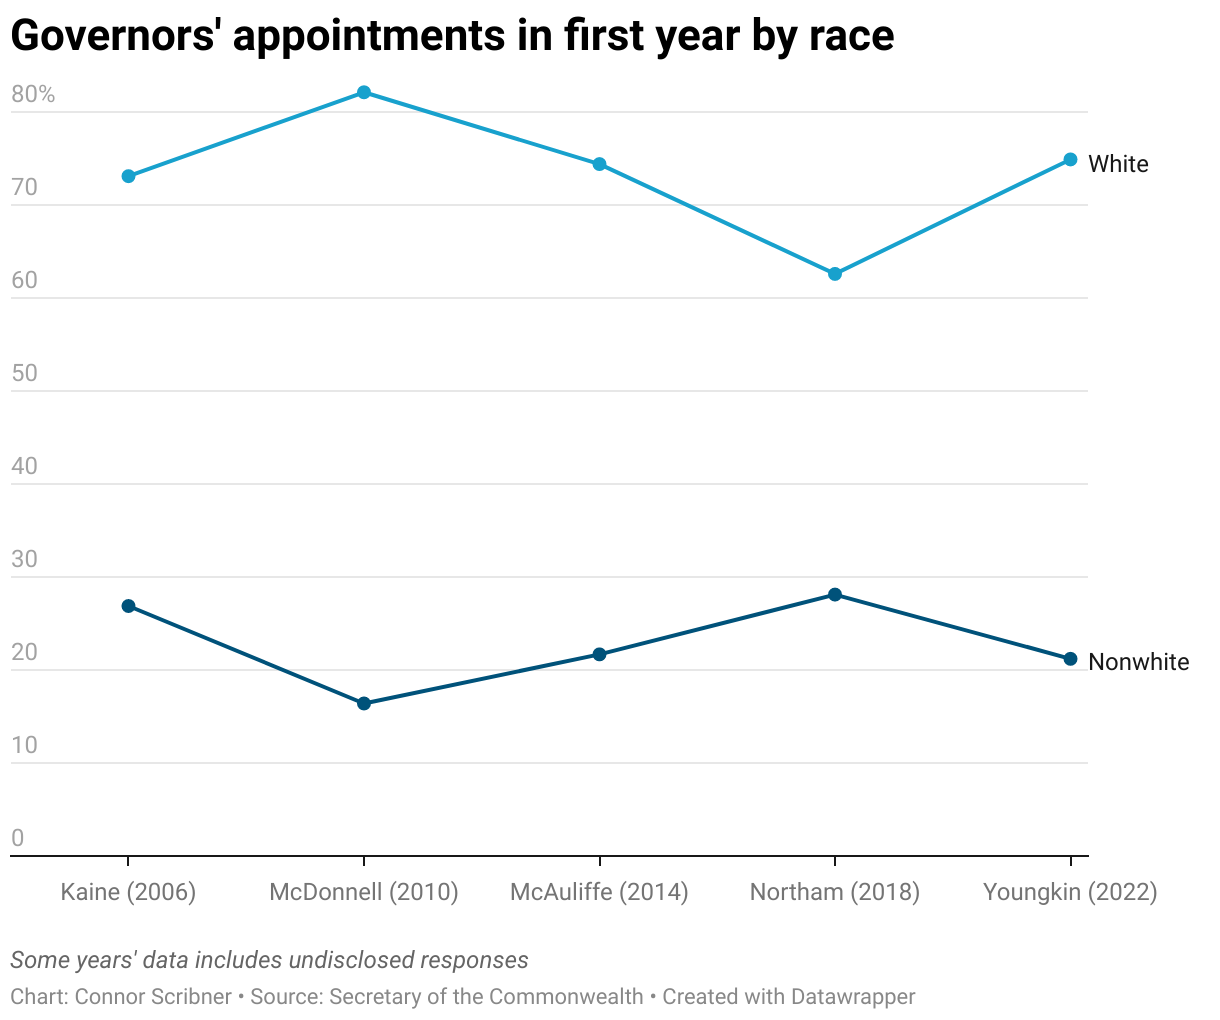 A line chart showing the percentage of white and nonwhite people appointed by the five most recent governors during their first years in office. Gov. Kim Kaine (2006): 73.1% white, 26.88% nonwhite; Gov. Bob McDonnell (2010): 82.12% white, 16.4% nonwhite; Gov. Terry McAuliffe (2014): 74.4% white, 21.68% nonwhite; Gov. Ralph Northam (2018): 62.59% white, 28.11% nonwhite female; Gov. Glenn Youngkin (2022): 74.9% white, 21.2% nonwhite